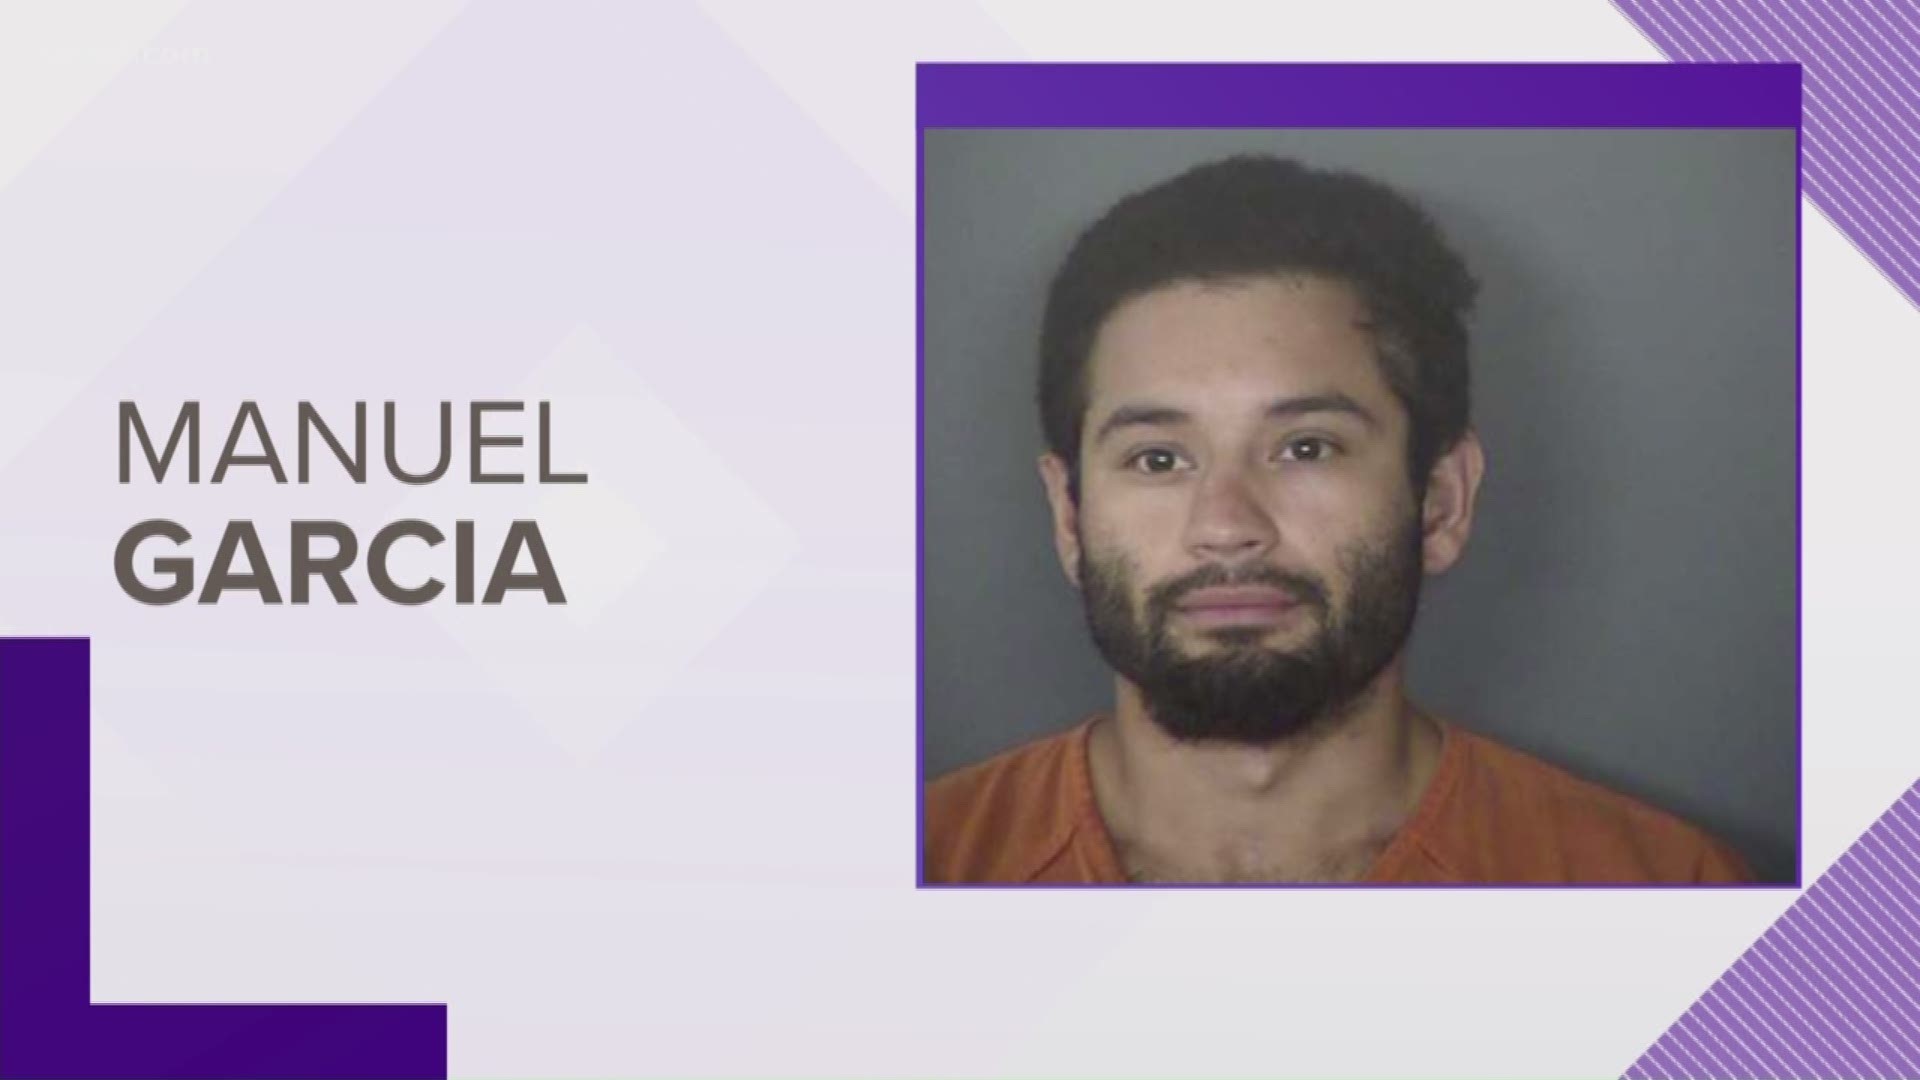 Manuel Jaime Garcia is accused of leading a deputy on a chase back in march on Highway 281 south. At one point he pulled into an apartment complex on Roosevelt and started running. While running, he took off his clothes.